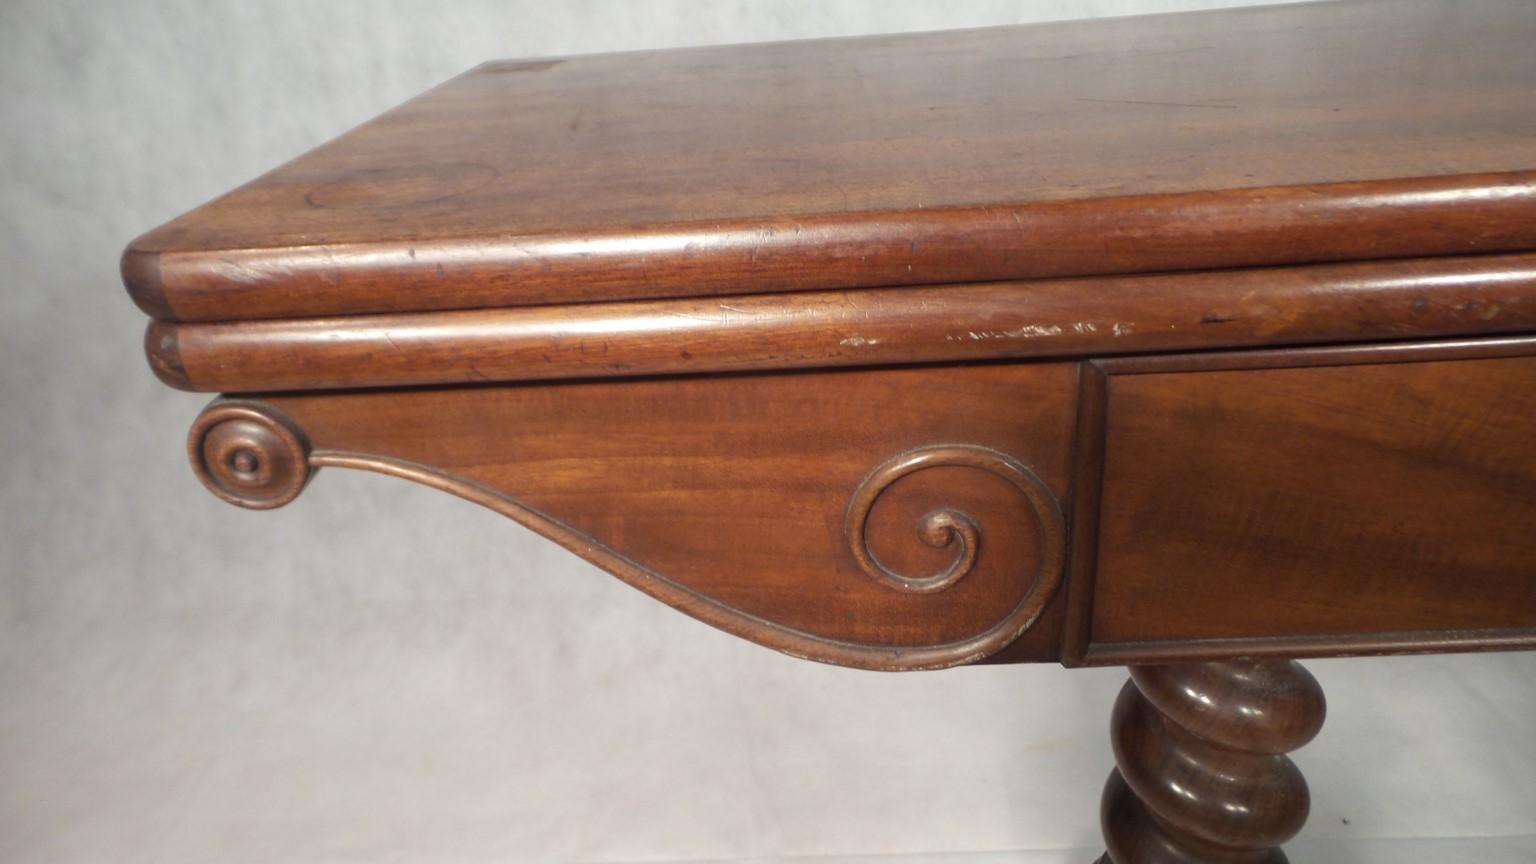 A really stunning antique Napoleon 111 games table in solid mahogany

The tabletop folds out, then twists to support it opening. Beneath is a compartment for cards and games pieces

The base is really quite beautiful with a heavy solid central